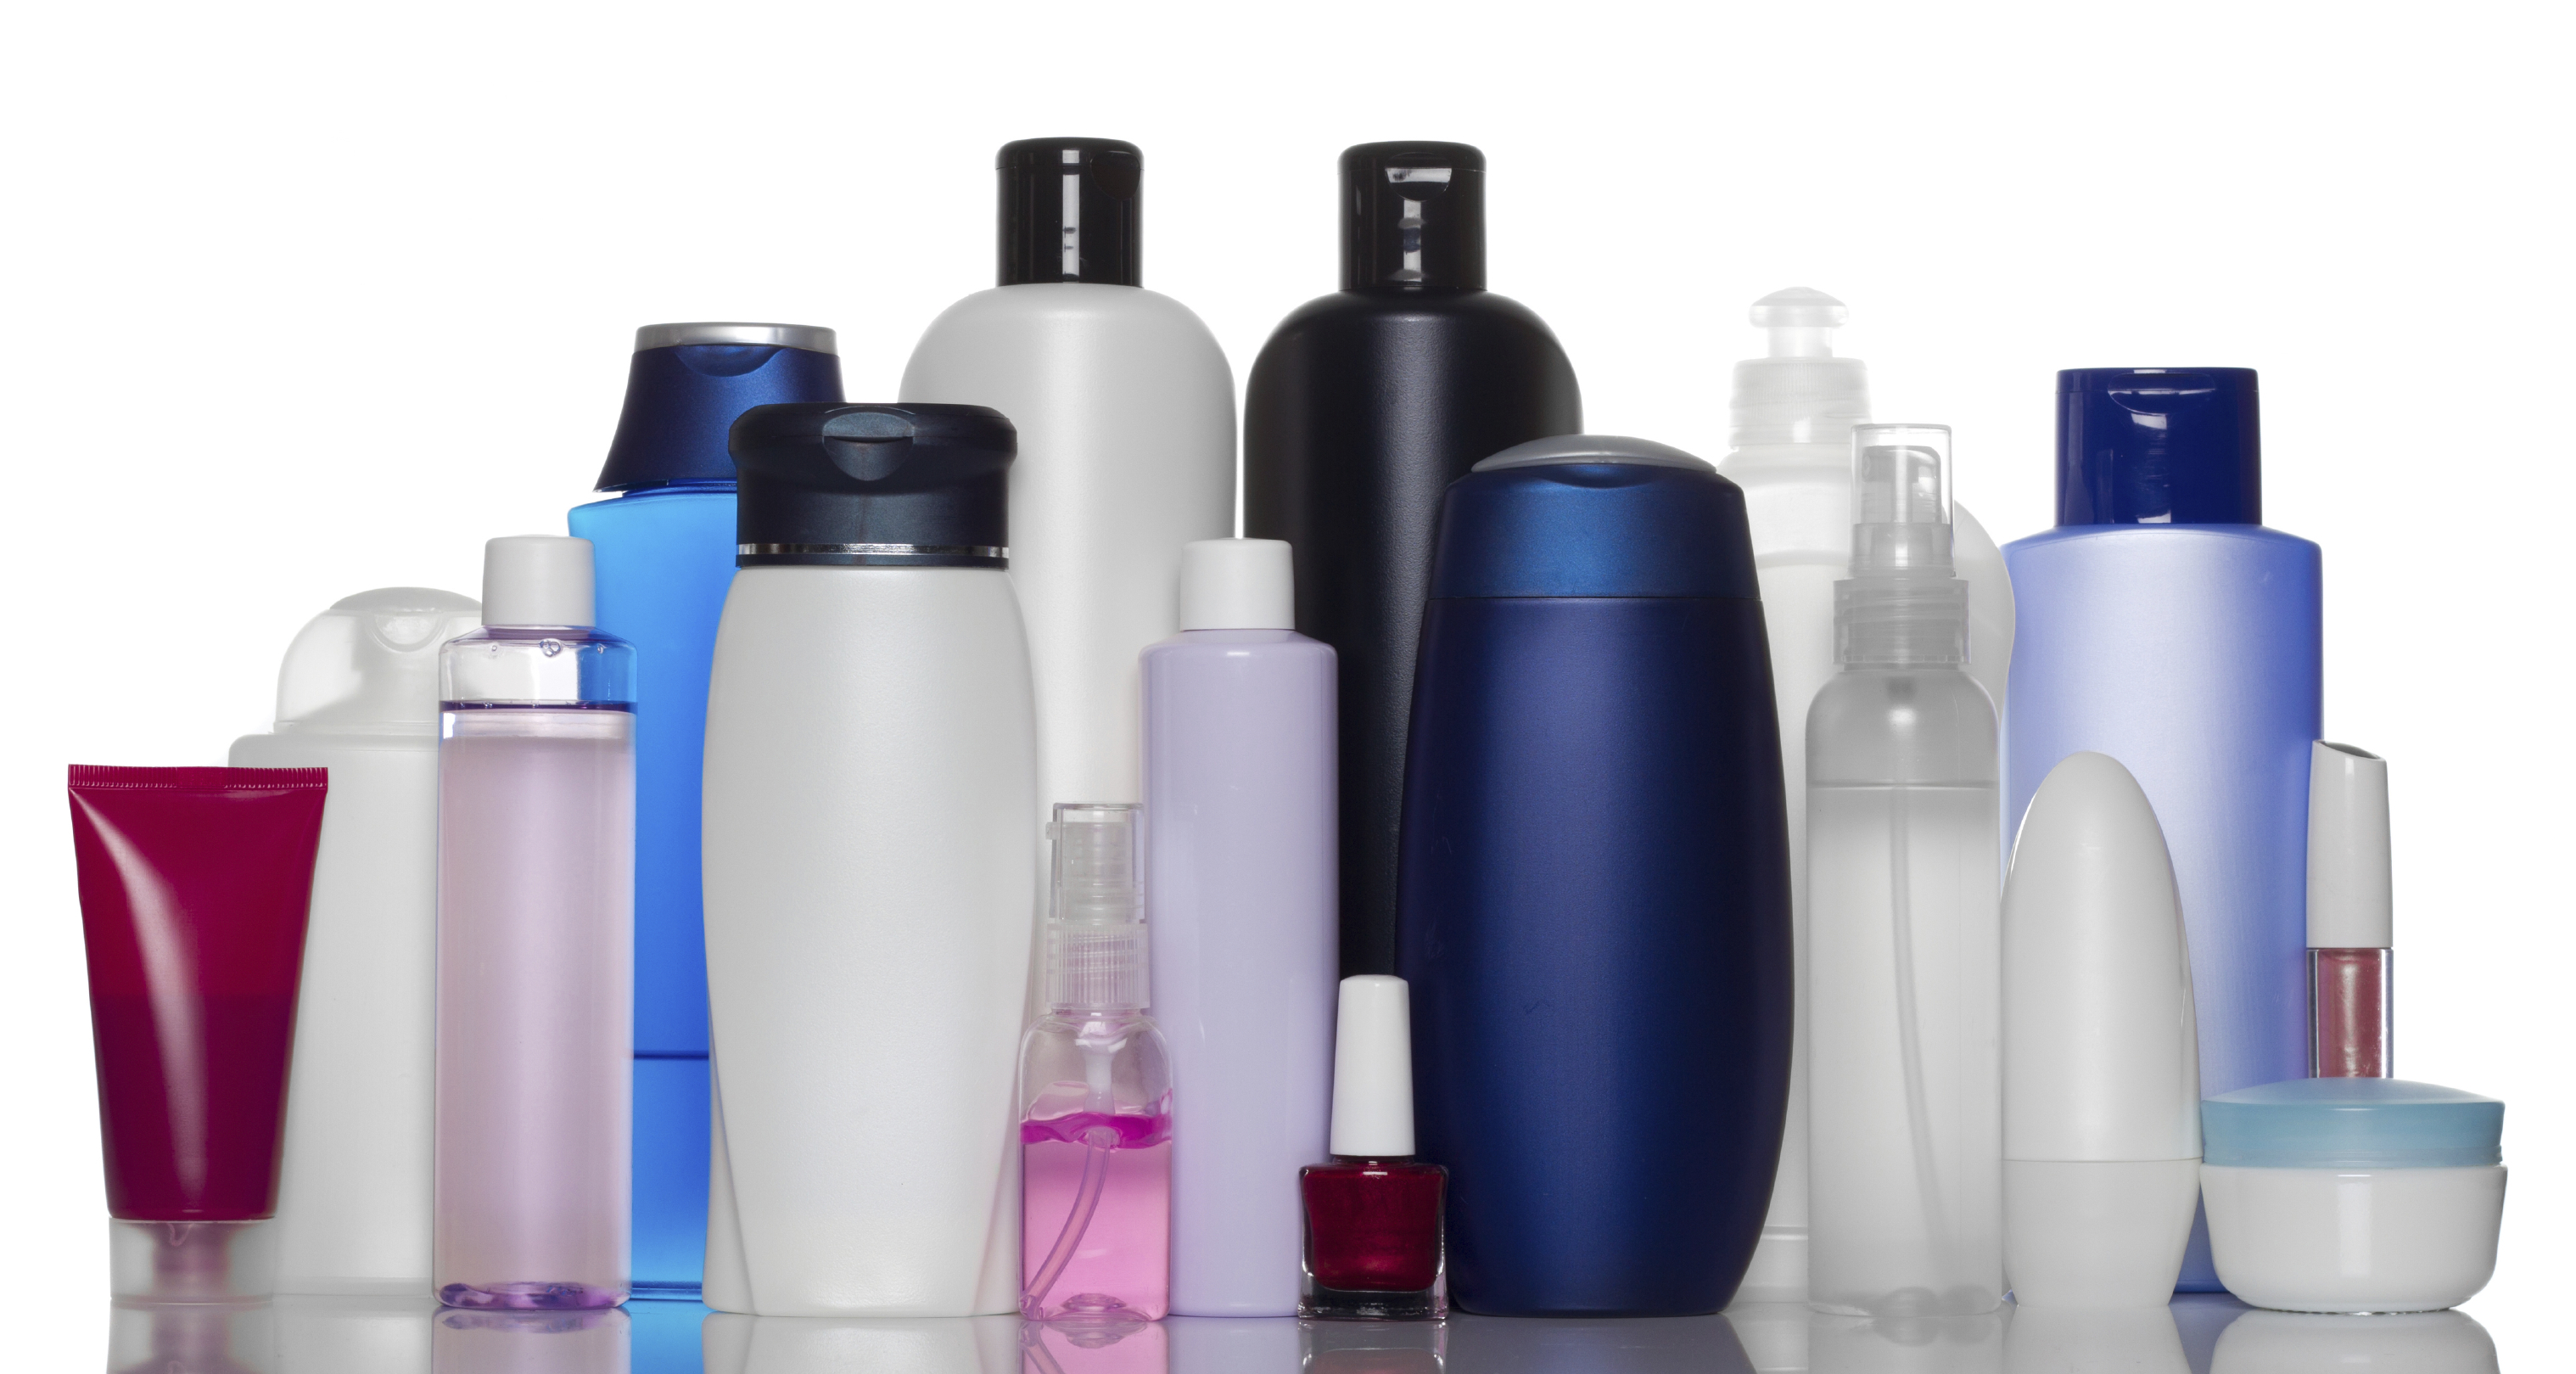 Shampoo bottles will now empty completely thanks to science